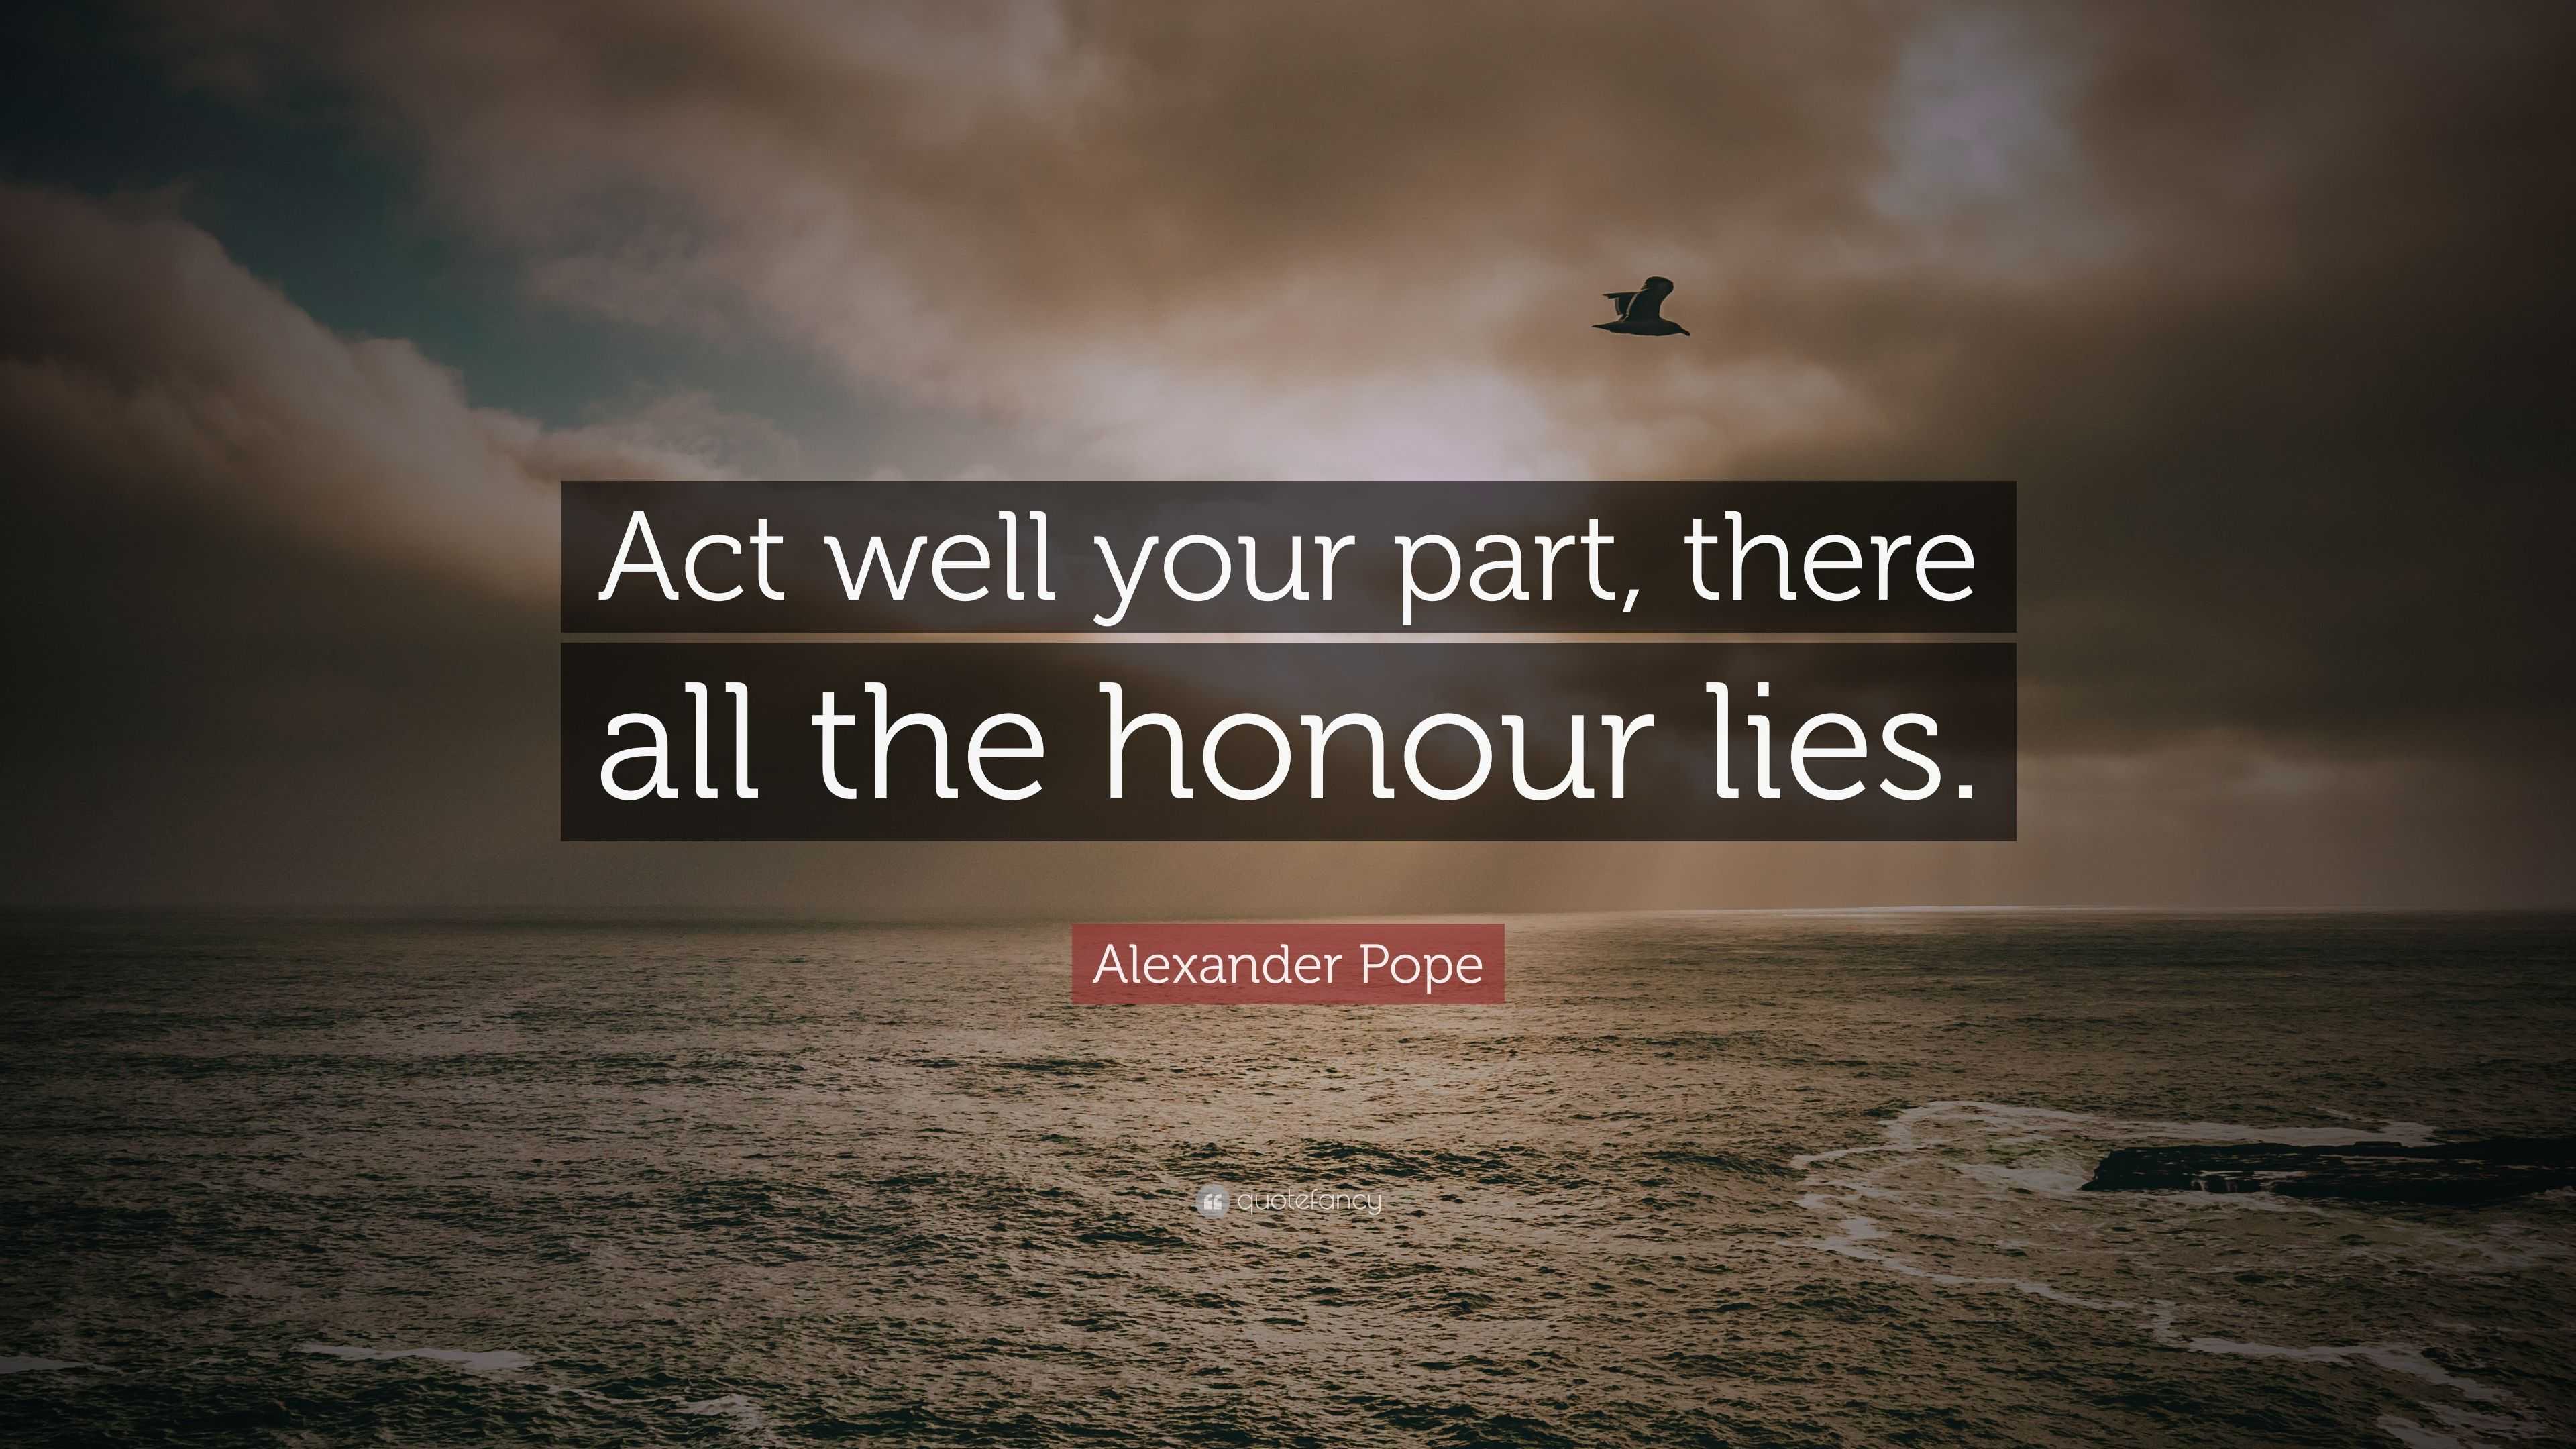 act well your part there all the honor lies